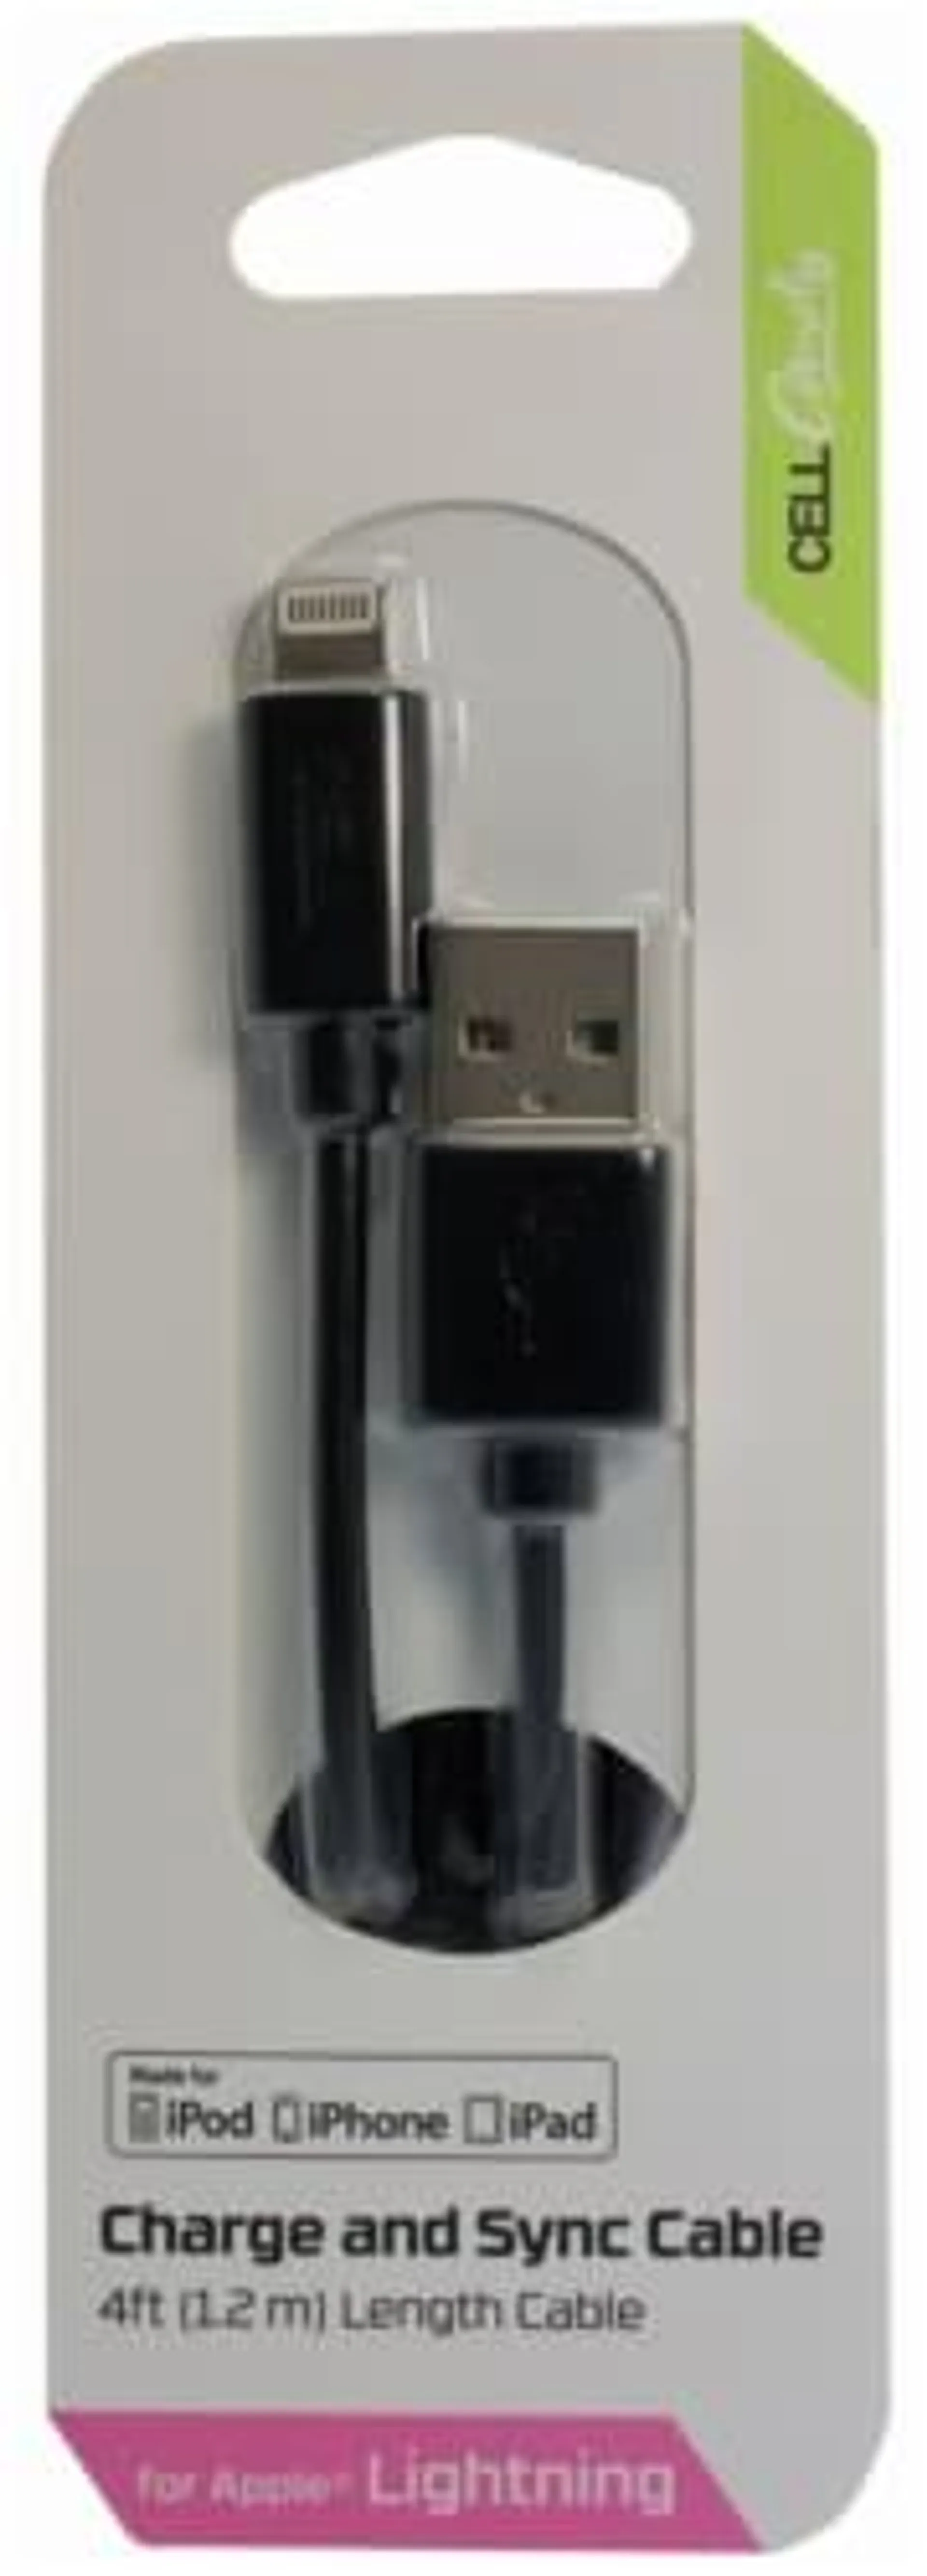 CELLCandy Charge and Sync Cable - Black